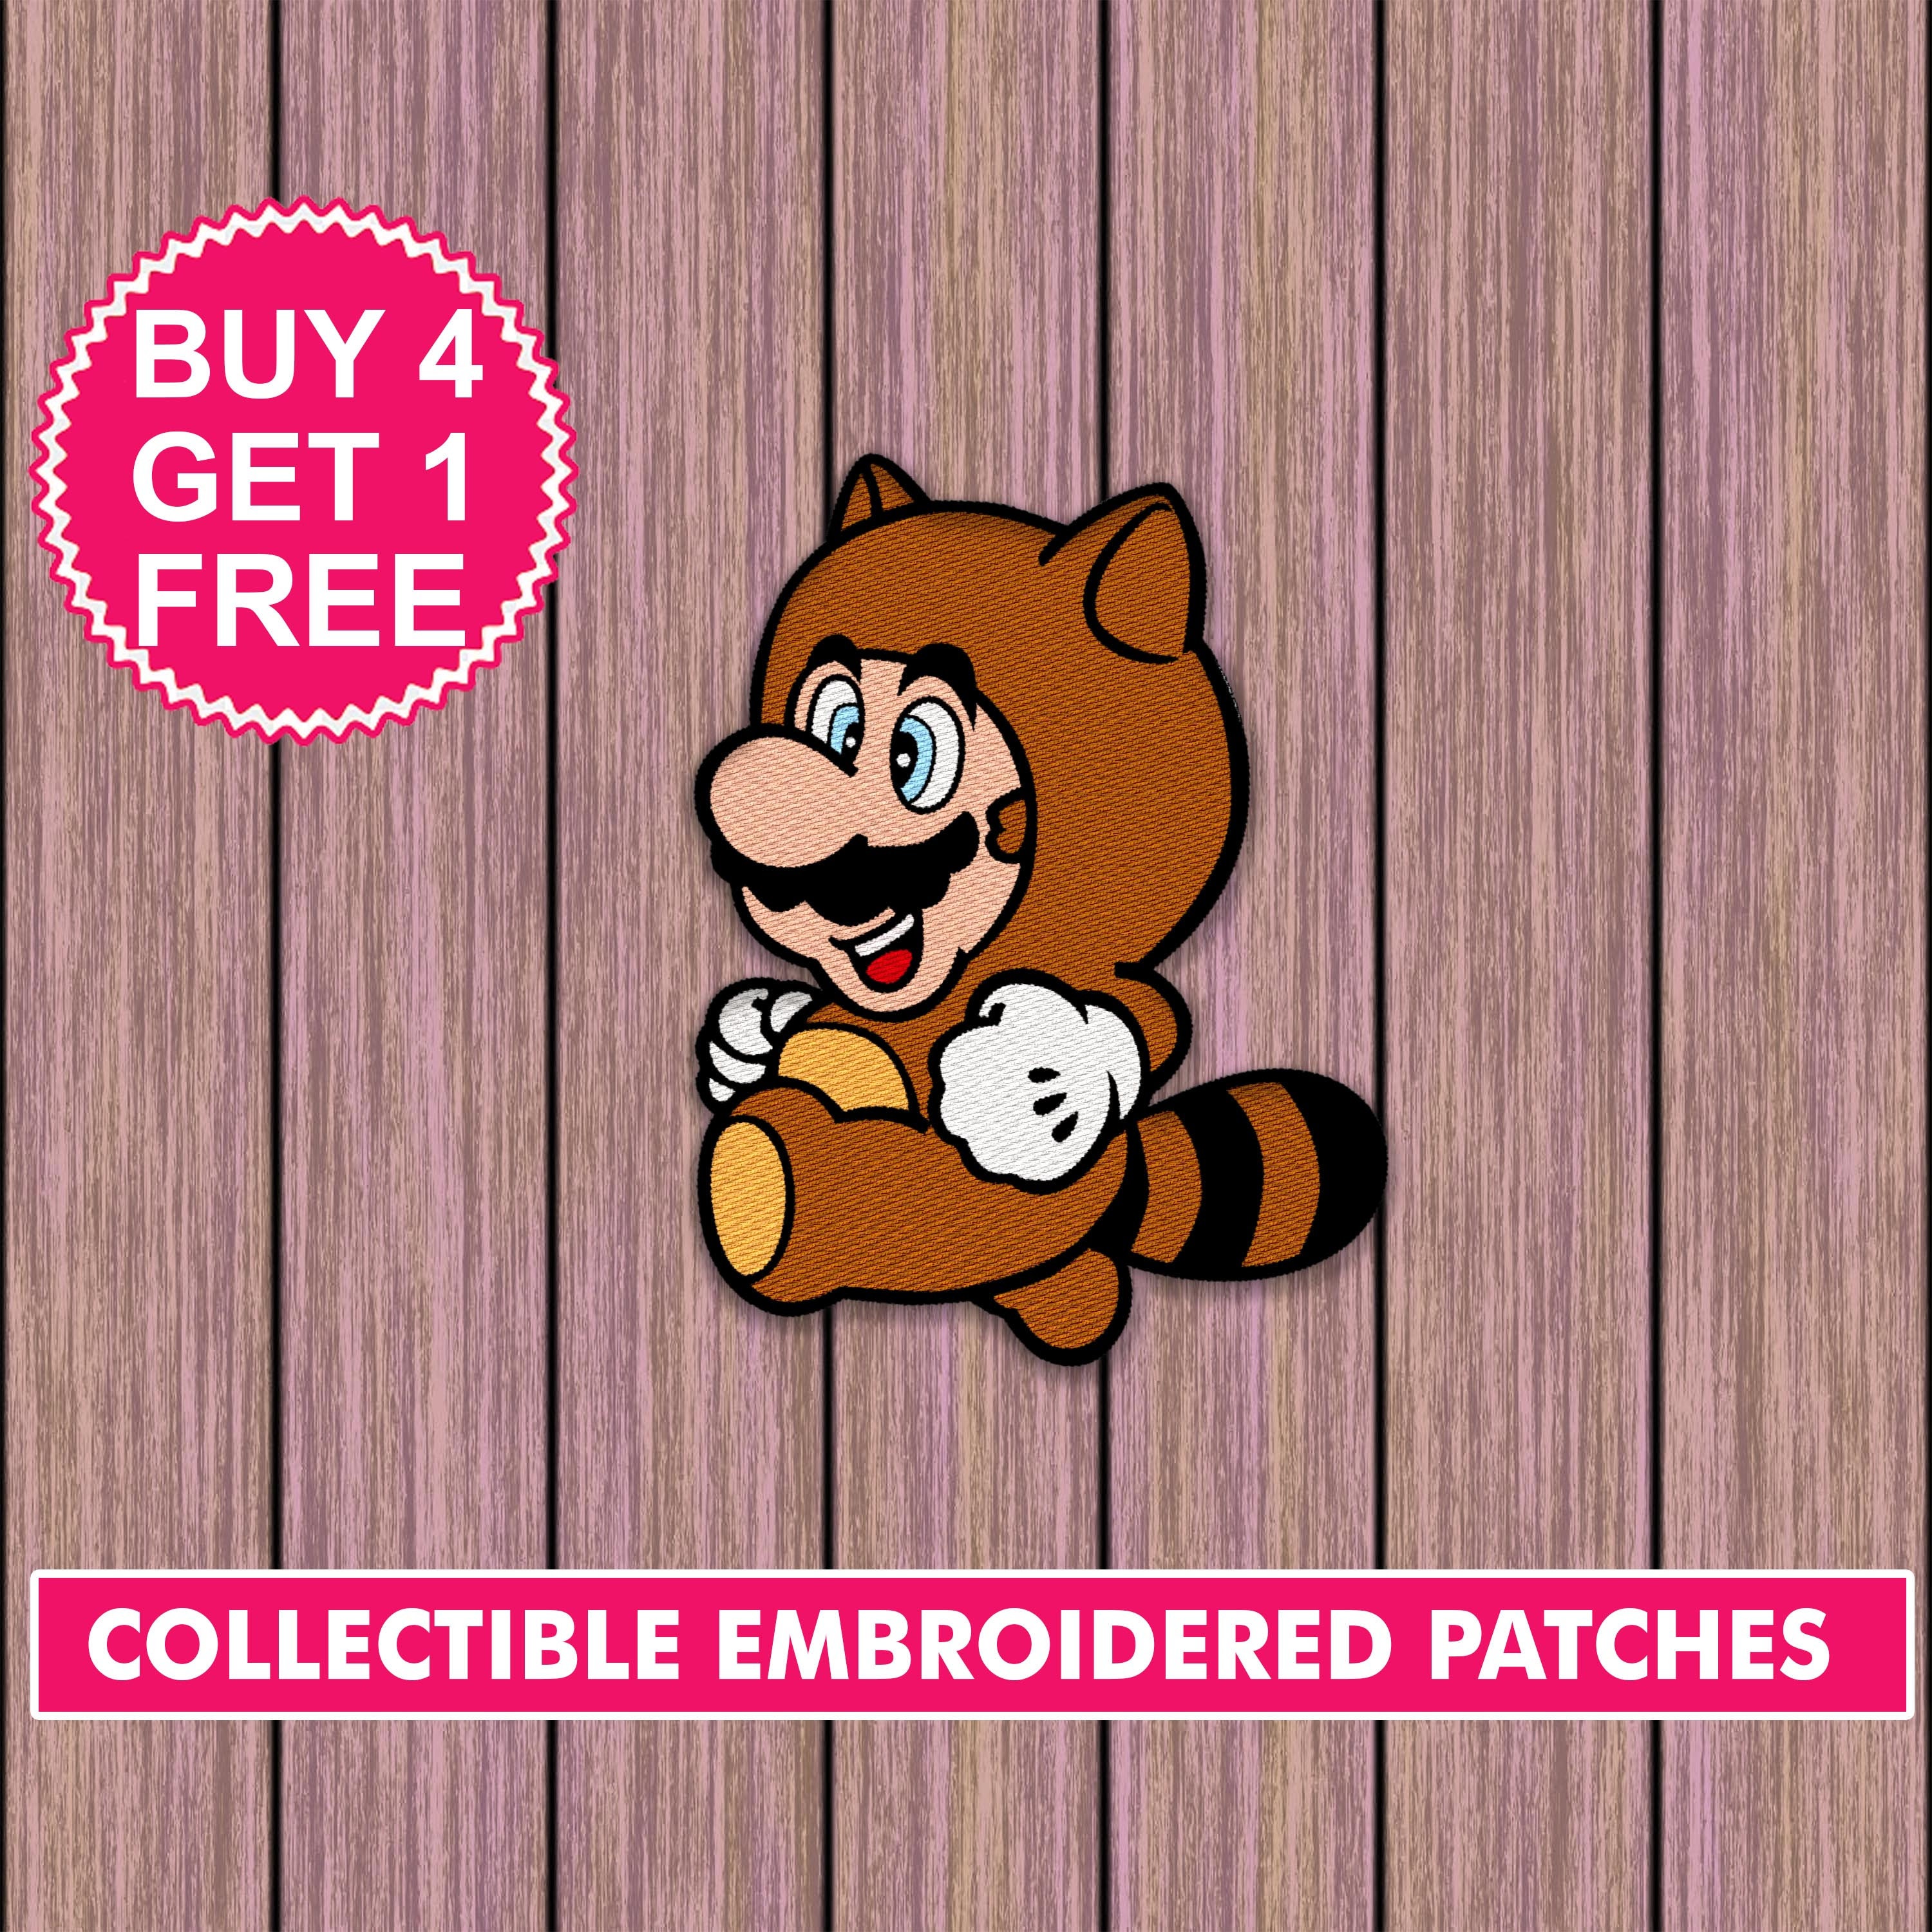 Embroidery Super Mario Odyssey - A.G.E Store anime game embroidery